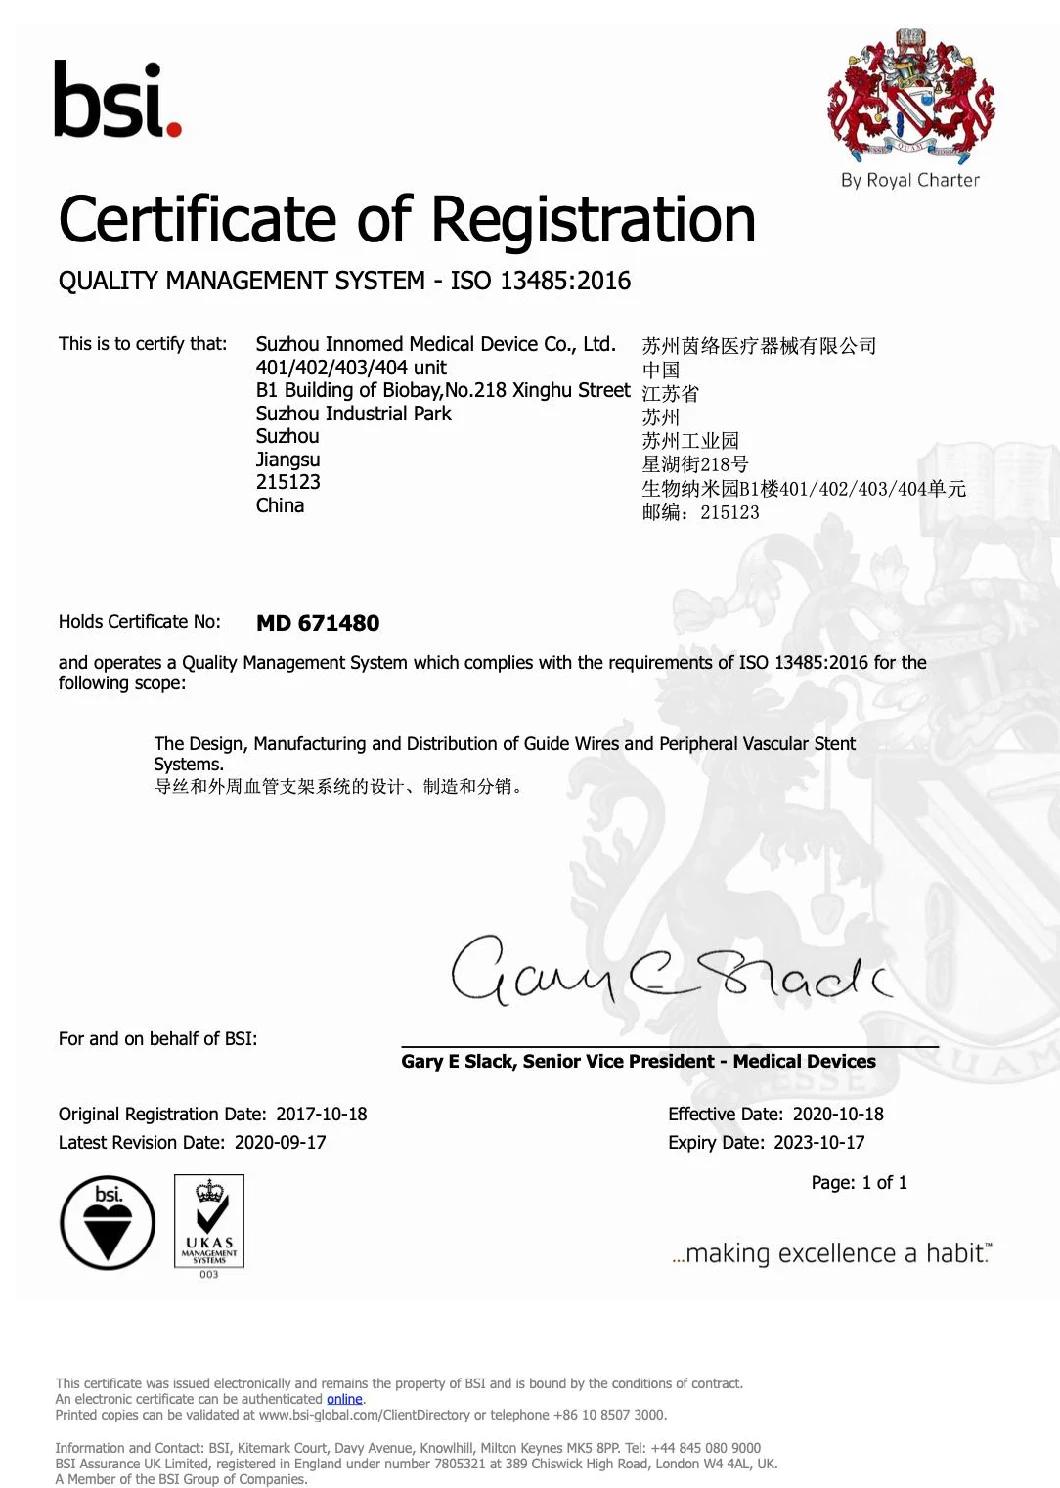 CE&ISO13485 Certification for PTFE Diagnostic Guidewire